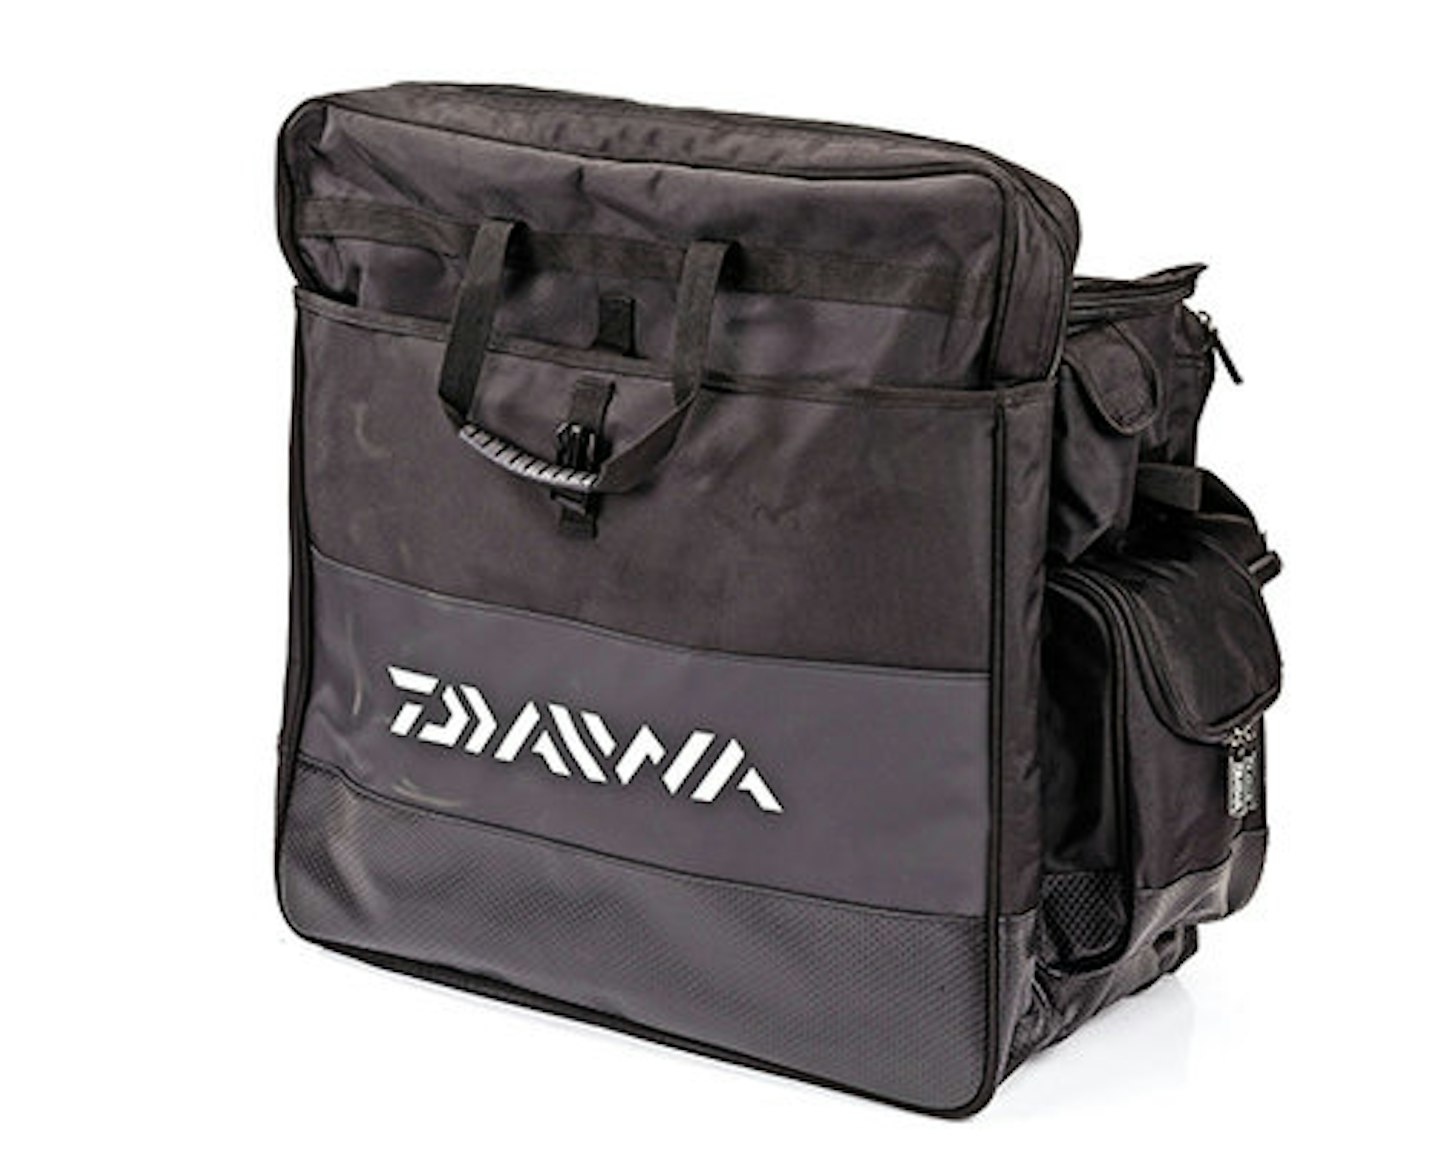 DAIWA DELUXE COMPLETE CARRYALL 